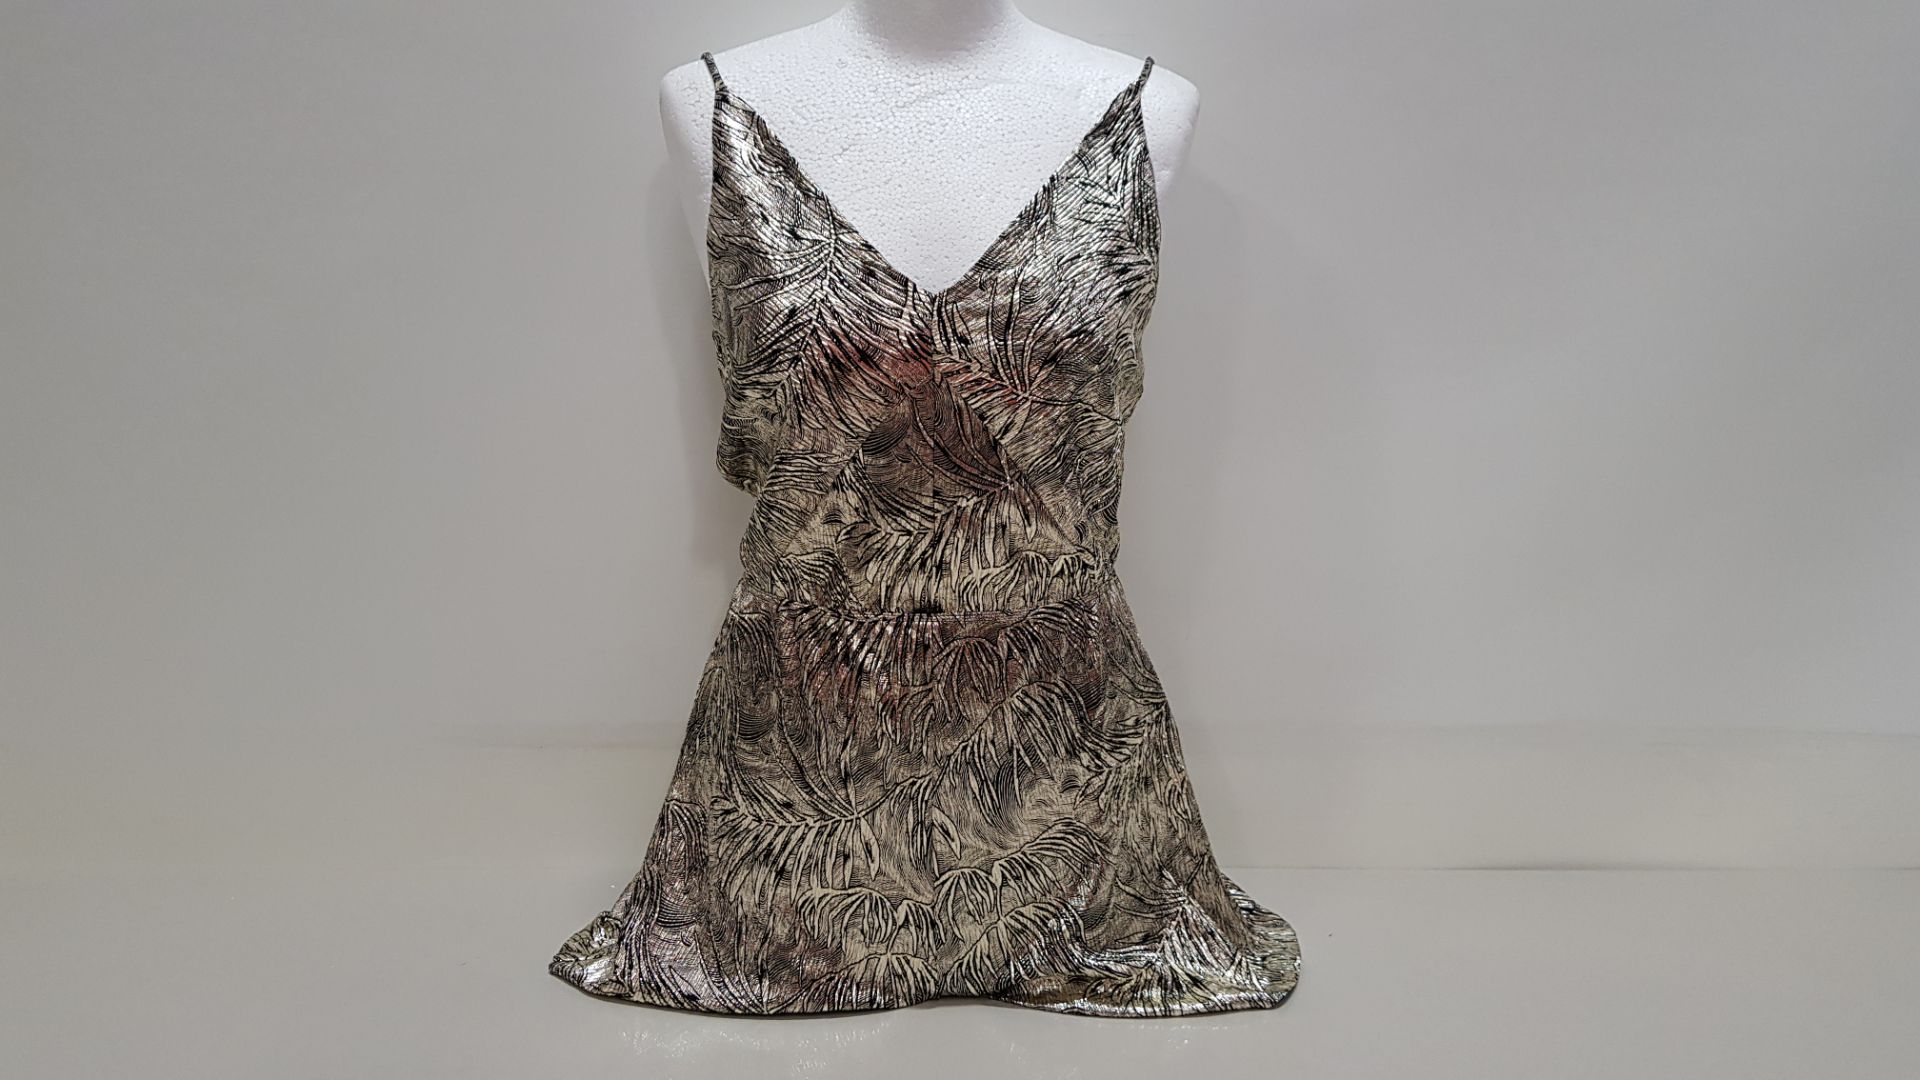 20 X BRAND NEW TOPSHOP GOLD DRESSES UK SIZE 10 RRP £36.00 (TOTAL RRP £720.00)